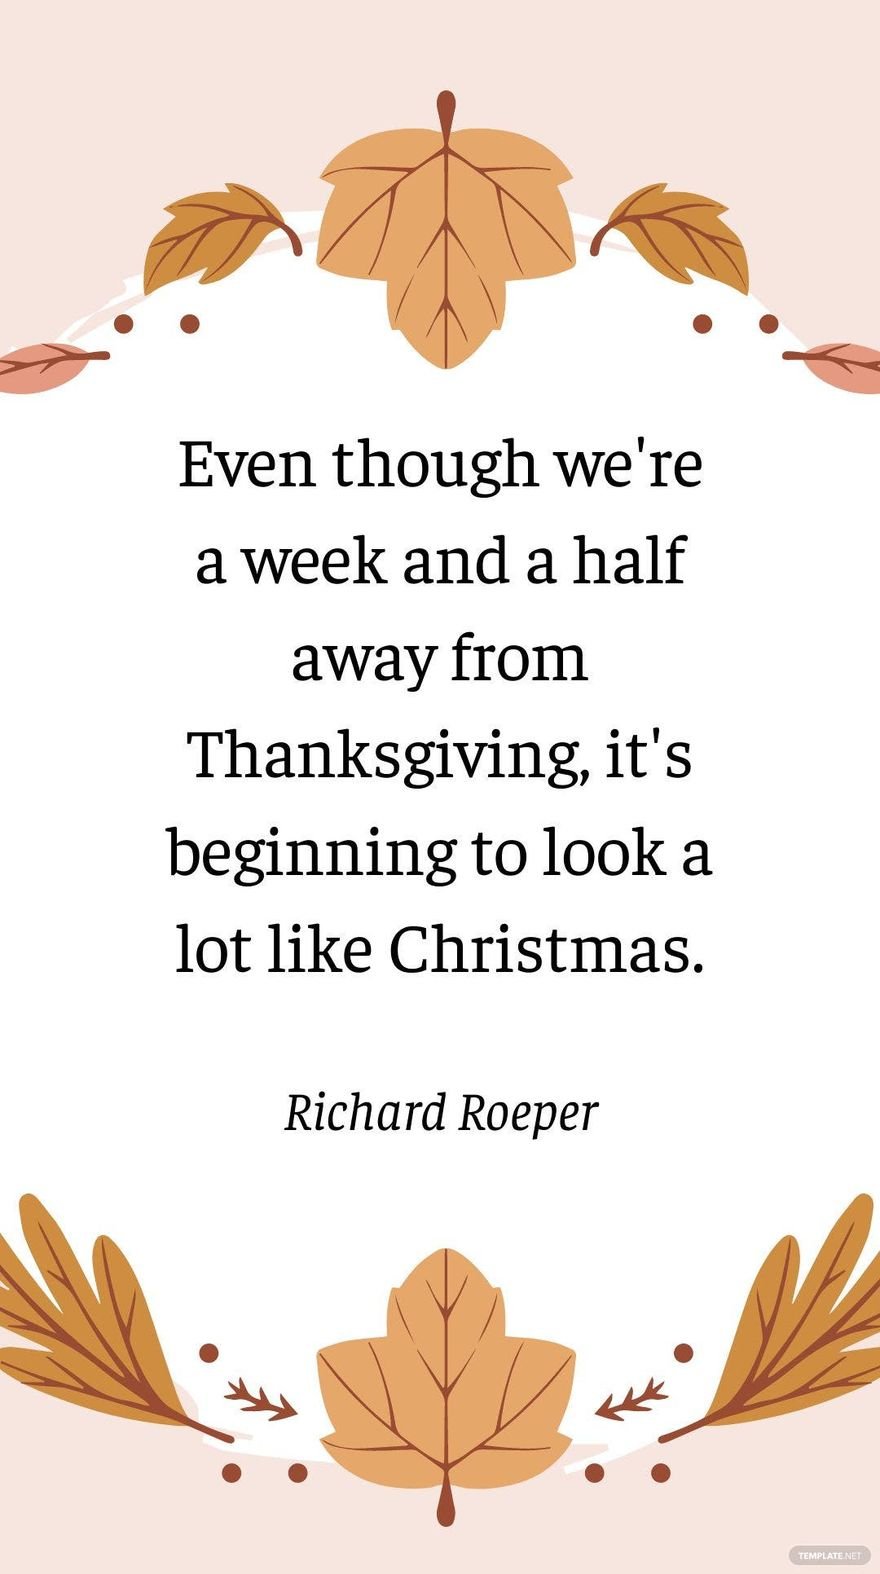 Free Richard Roeper - Even though we're a week and a half away from Thanksgiving, it's beginning to look a lot like Christmas. in JPG